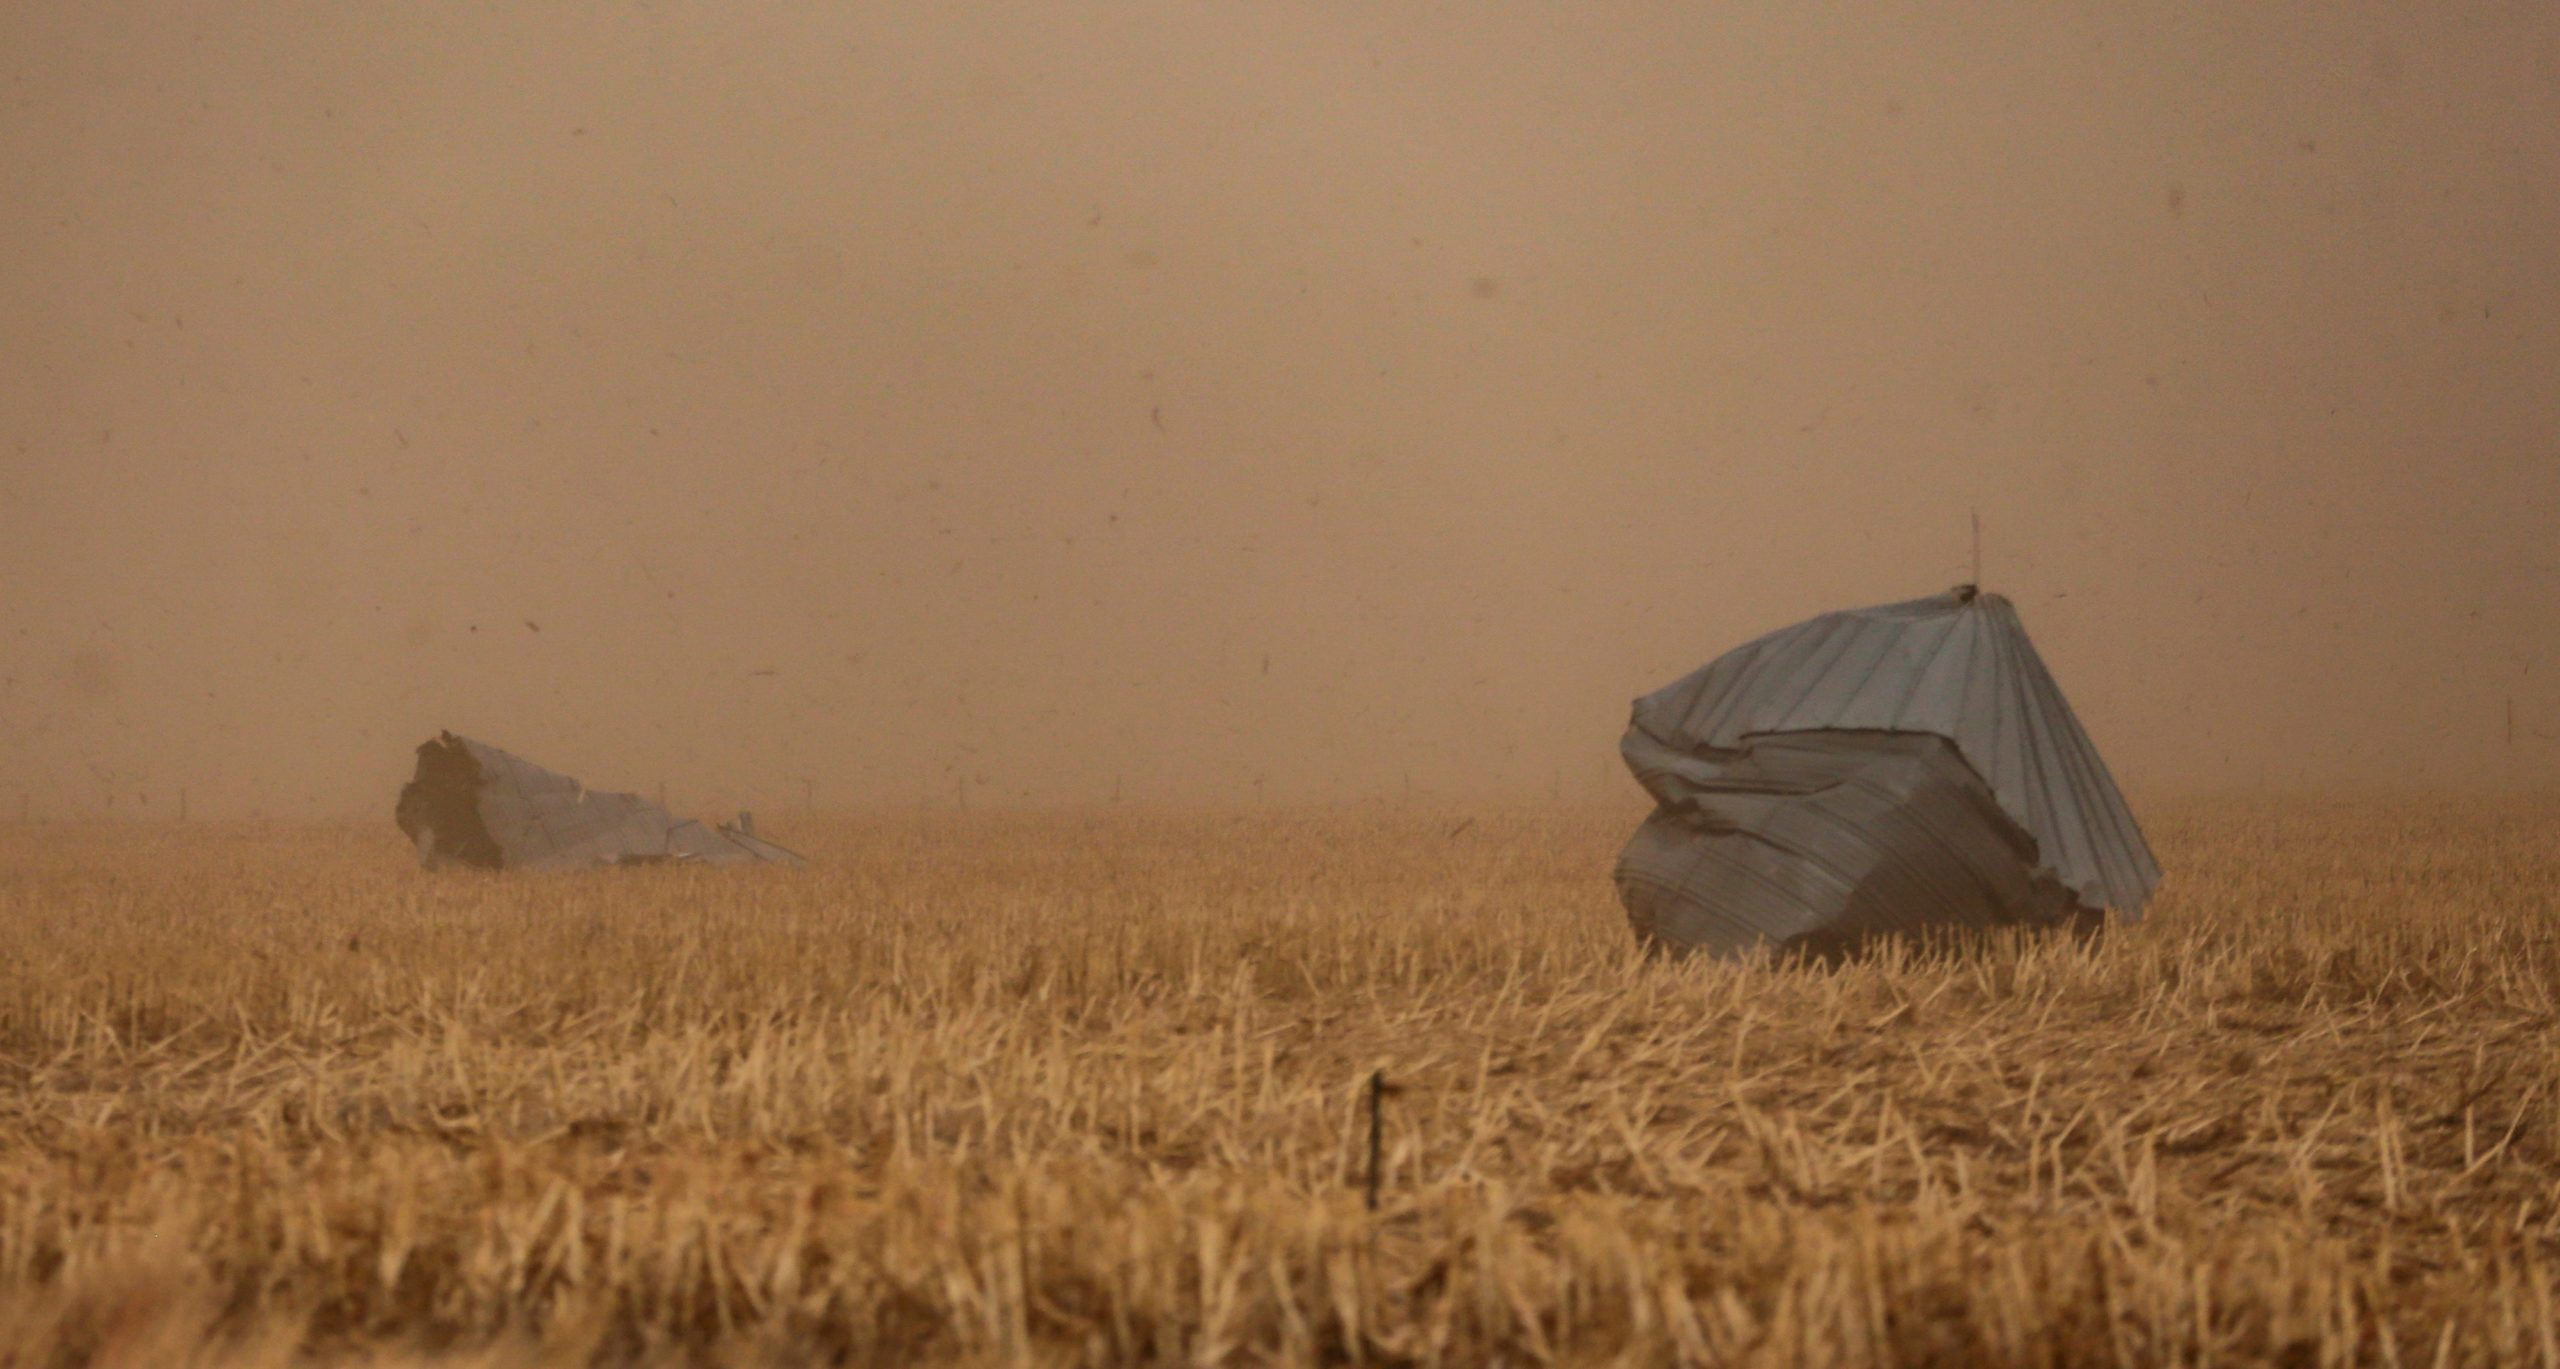 The Hodgeman County Undersheriff confirmed these grain bins were blown away from a nearby farm into cornfield across Hwy 283 in Jetmore, Kansas. (Photo: Travis Heying/The Wichita Eagle, AP)